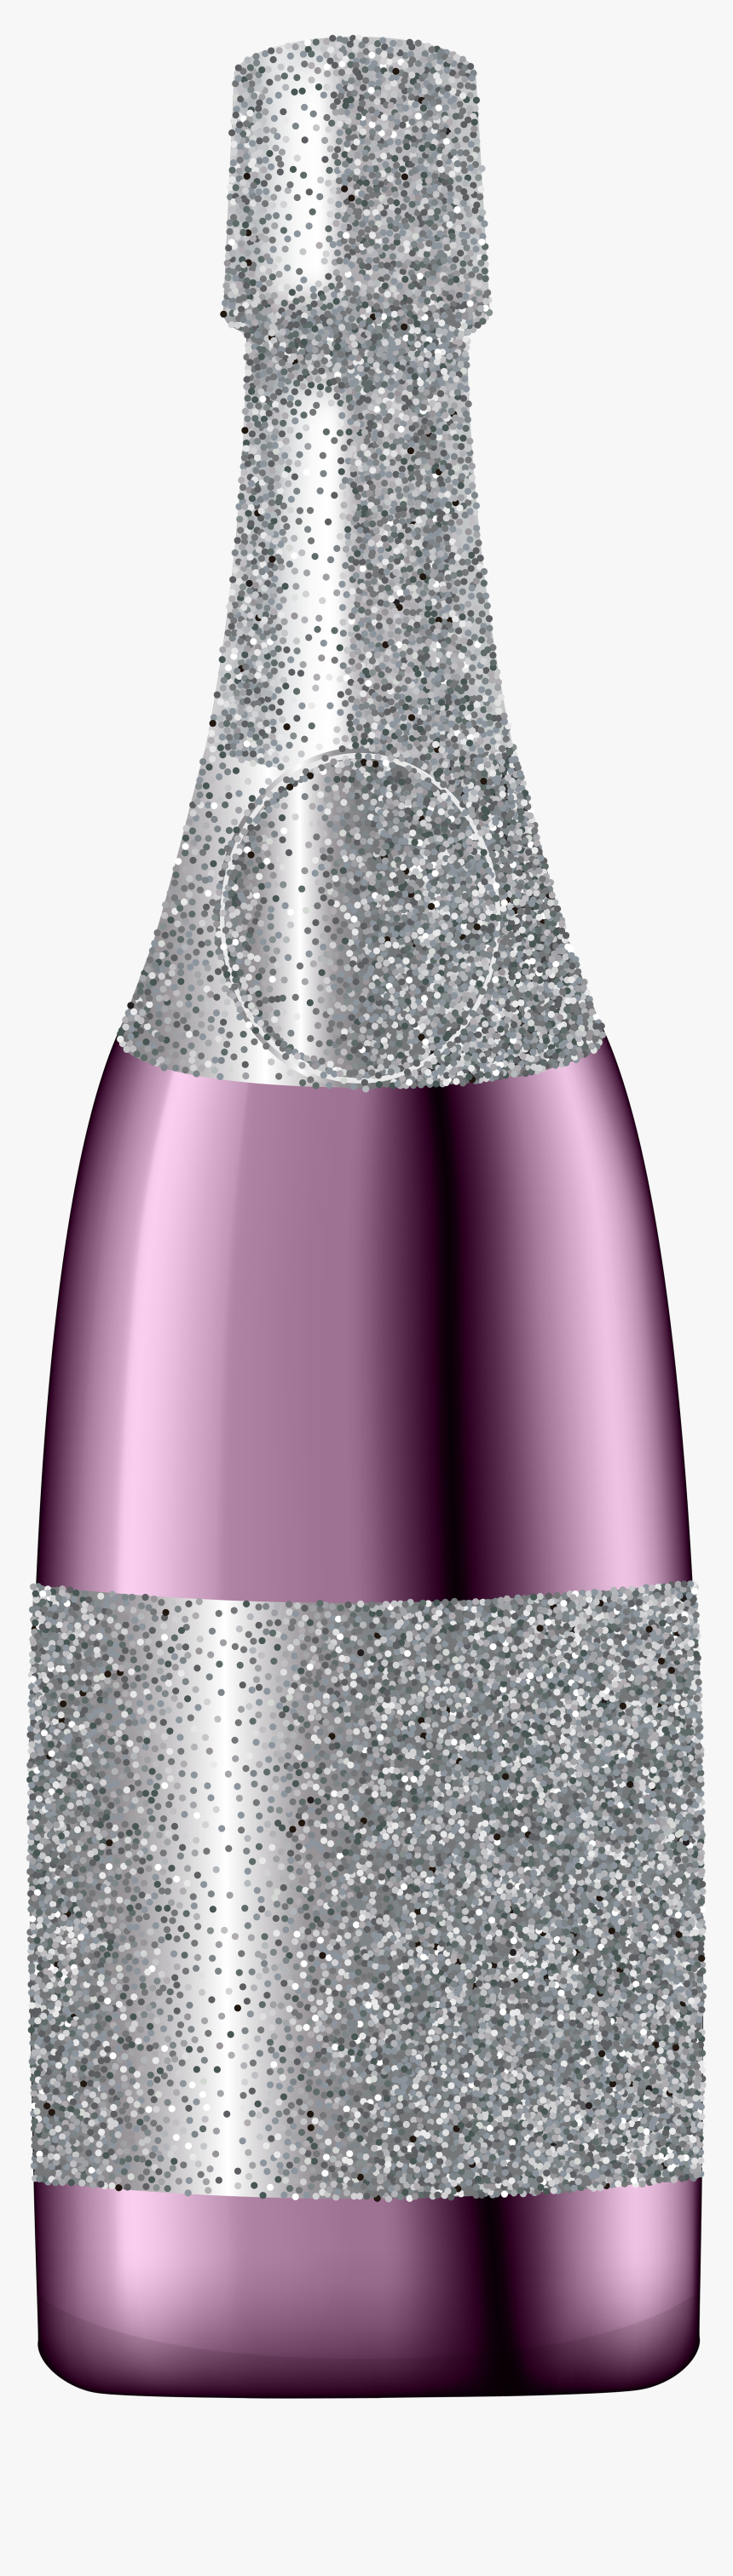 Pink Champagne Png - Silver Champagne Bottle Clipart, Transparent Png, Free Download